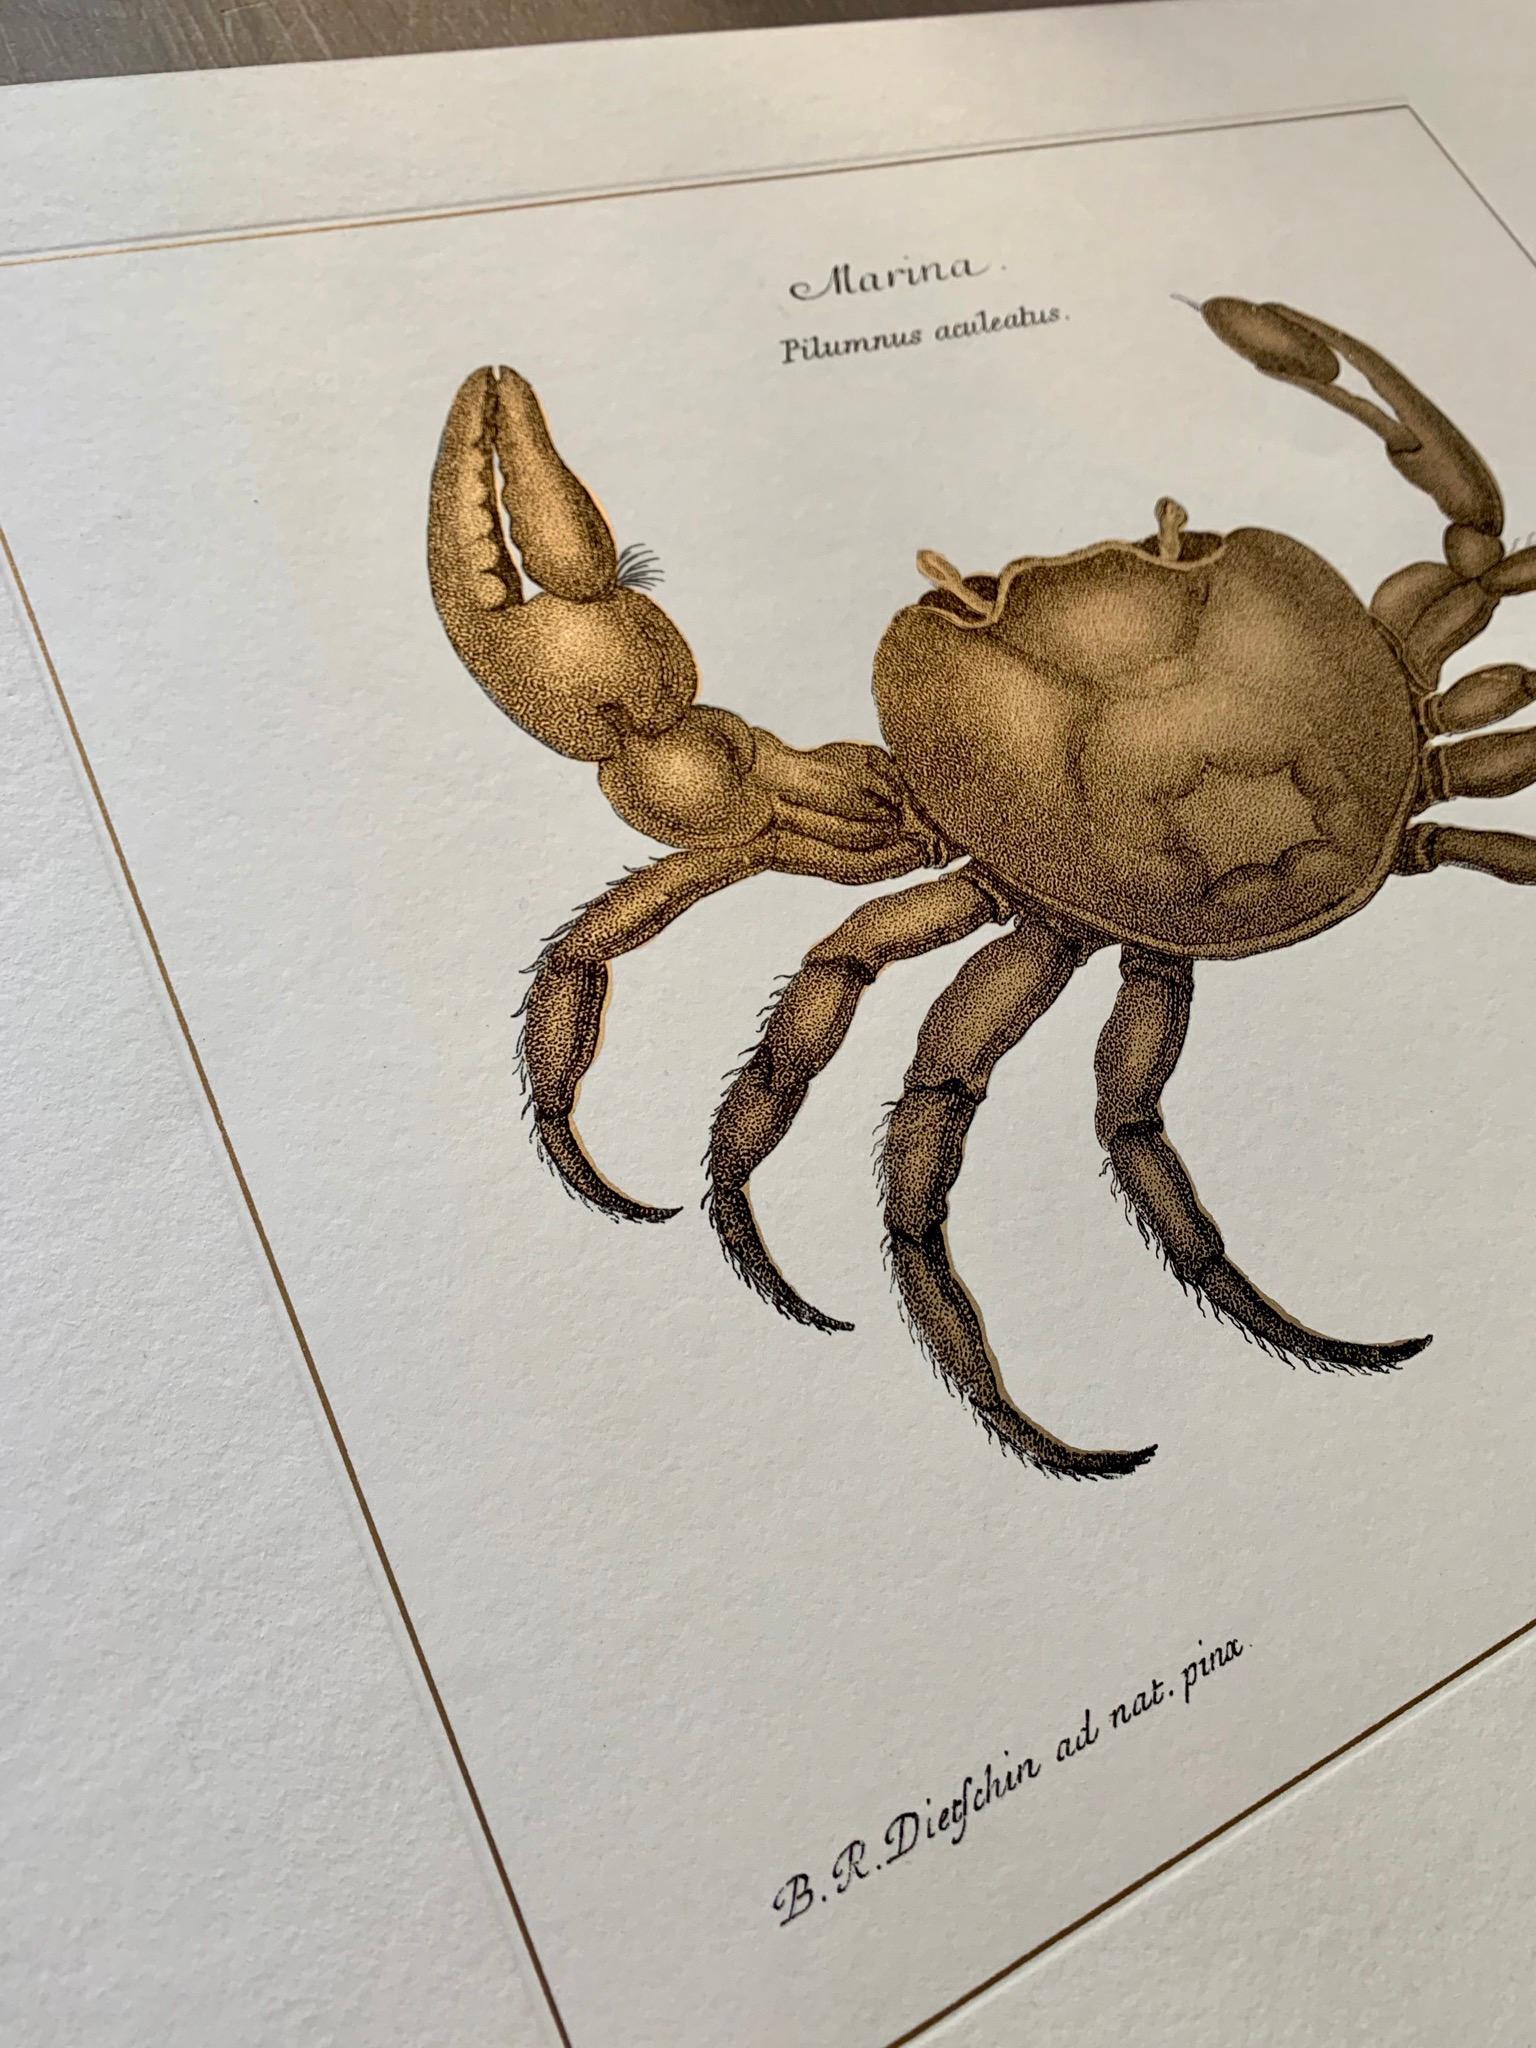 Marina Crab handcrafted print. The technique of printing on gold leaf is our reinterpretation of an ancient tradition.
Each print is entirely printed and colored in Italy by our master craftsmen.
Elegant hand-colored print representing a crab